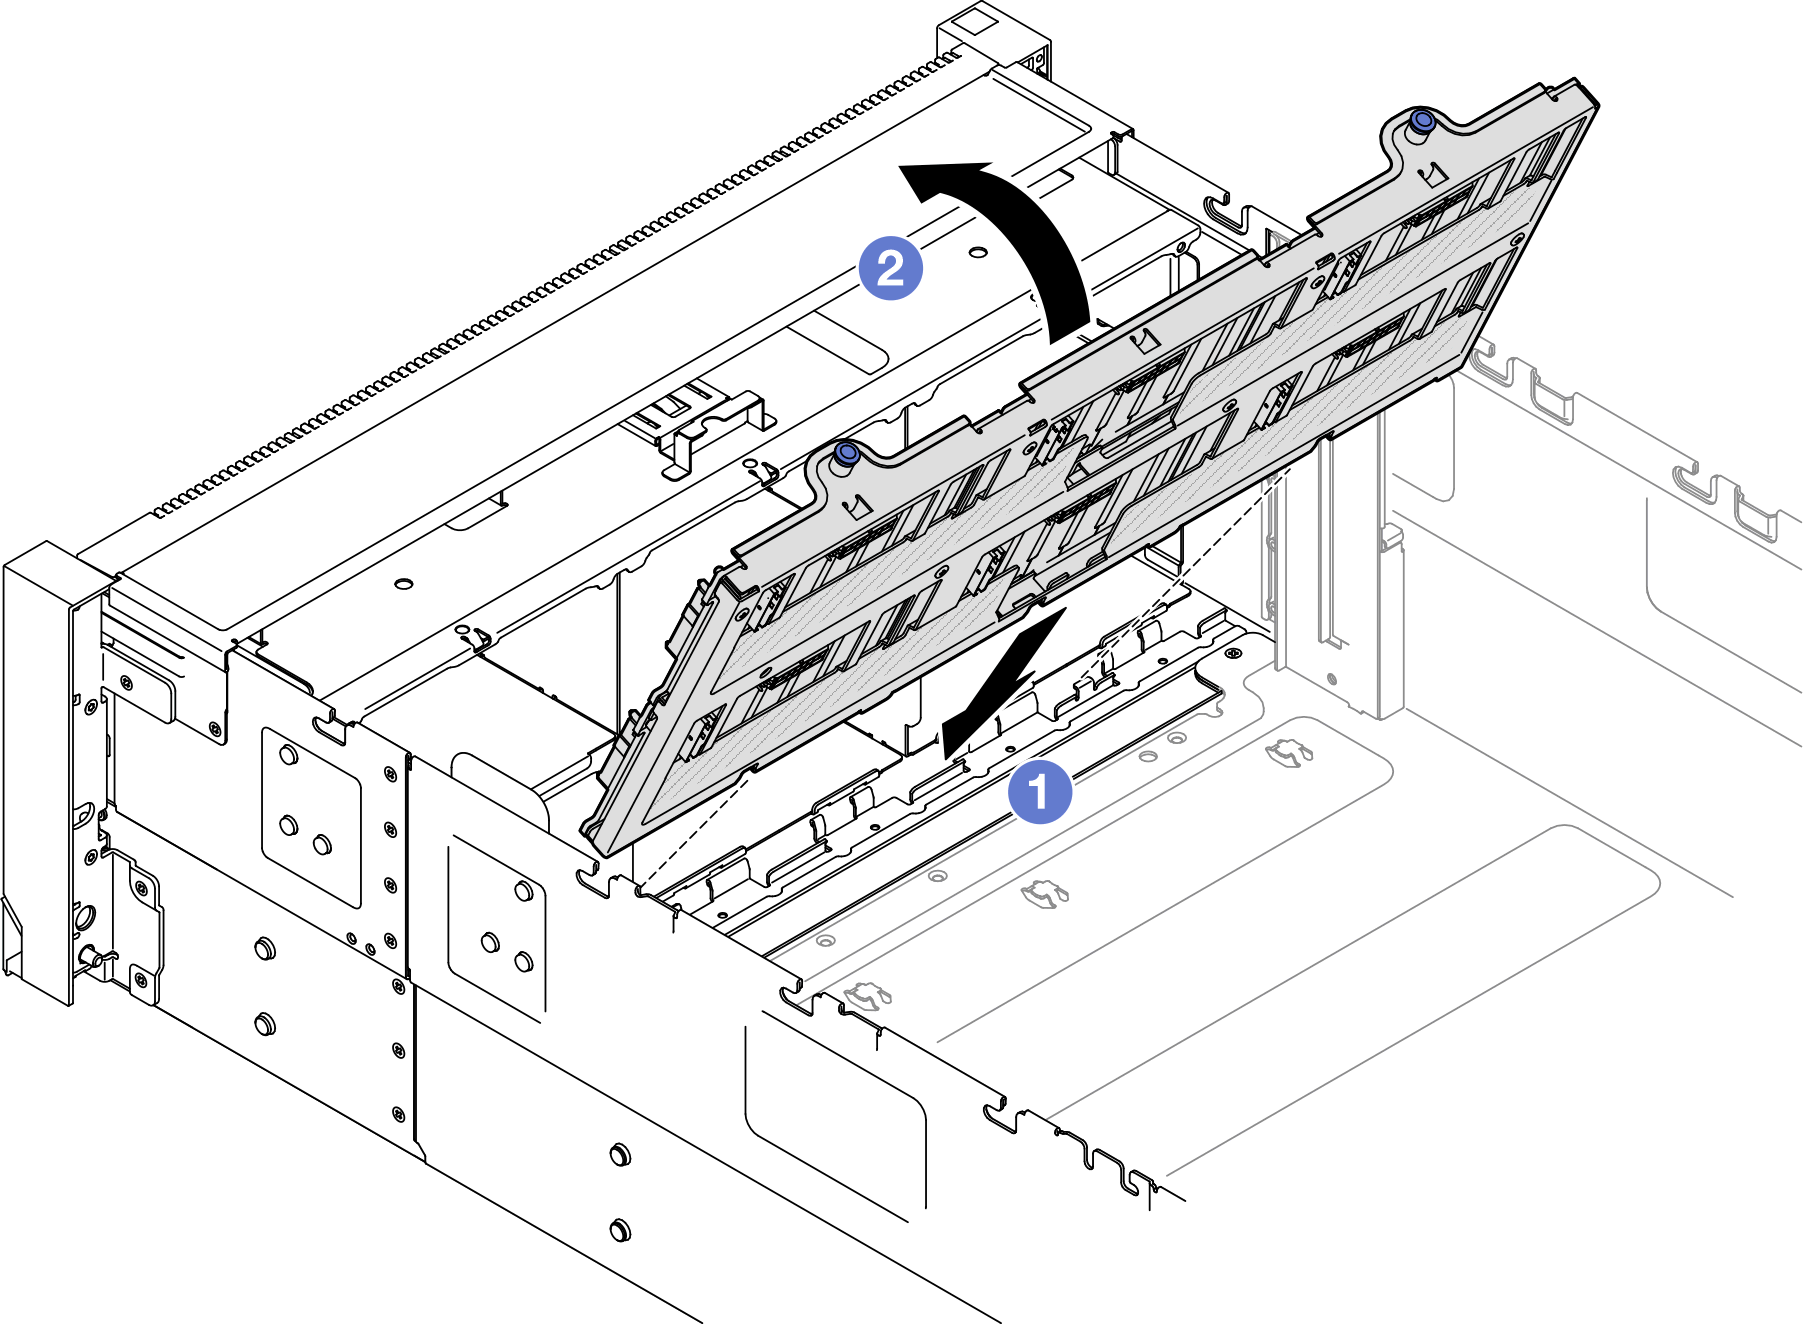 Installing drive backplane carrier assembly